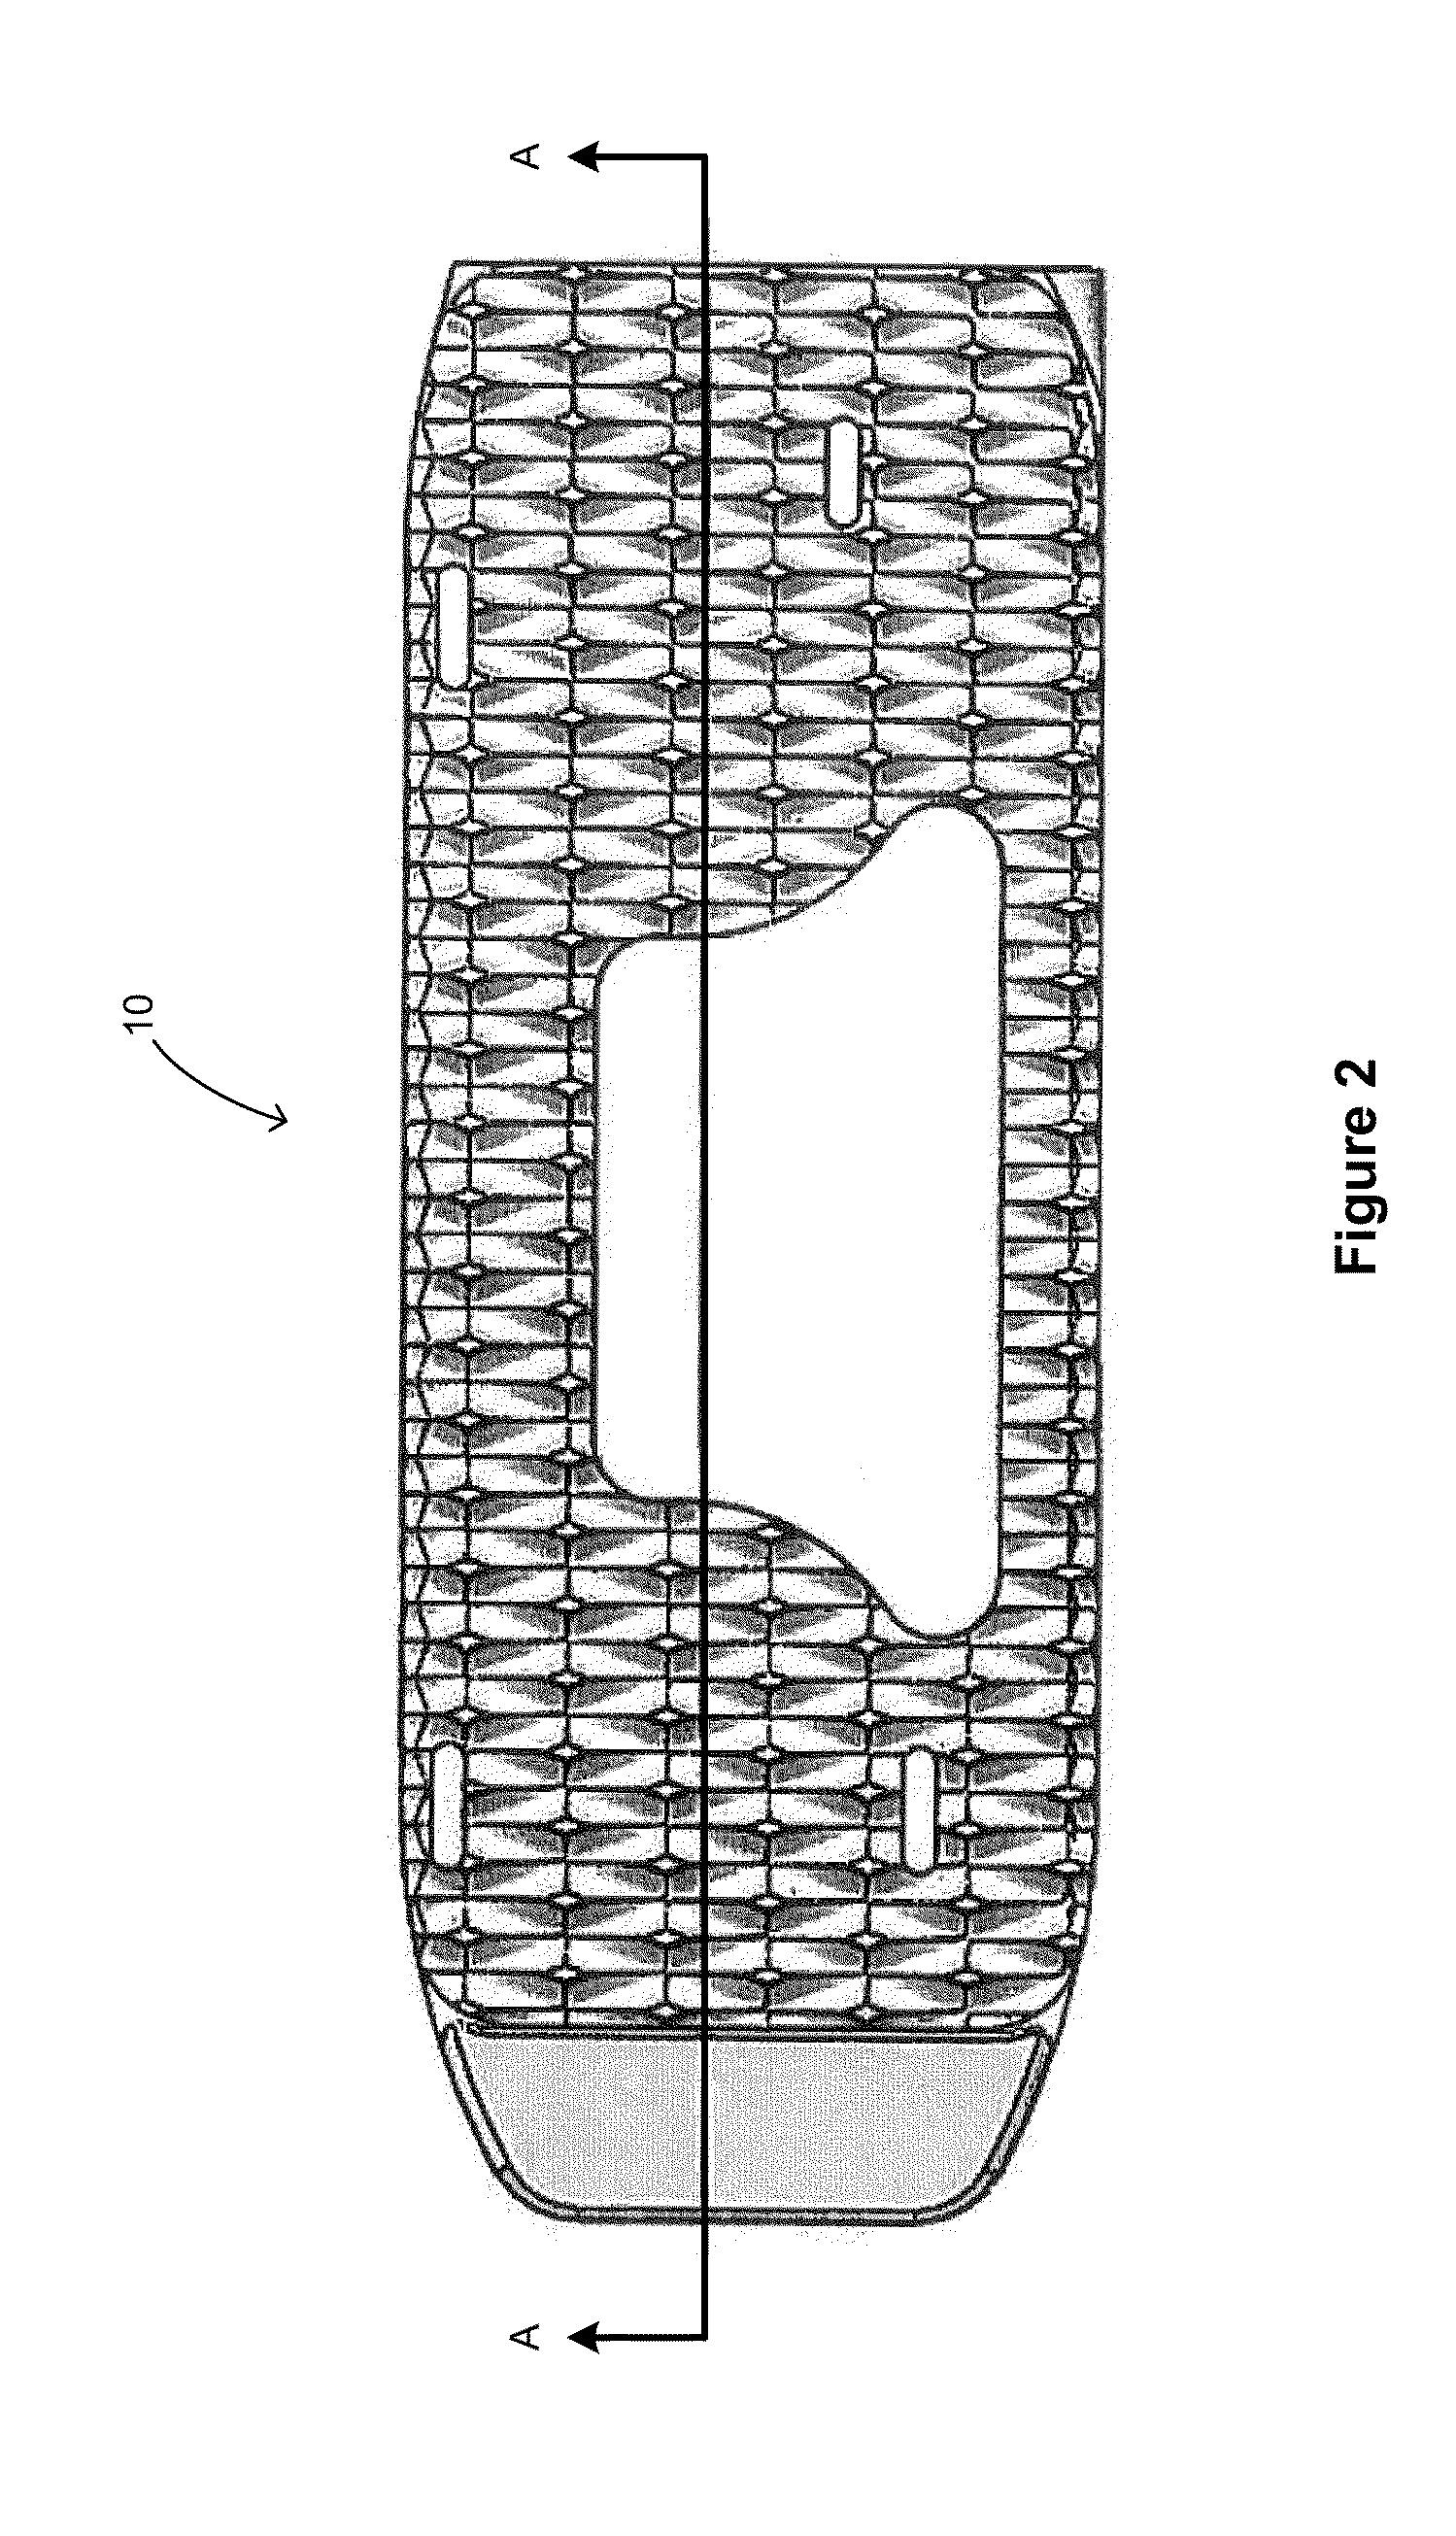 Structurally supporting insert for spinal fusion cage